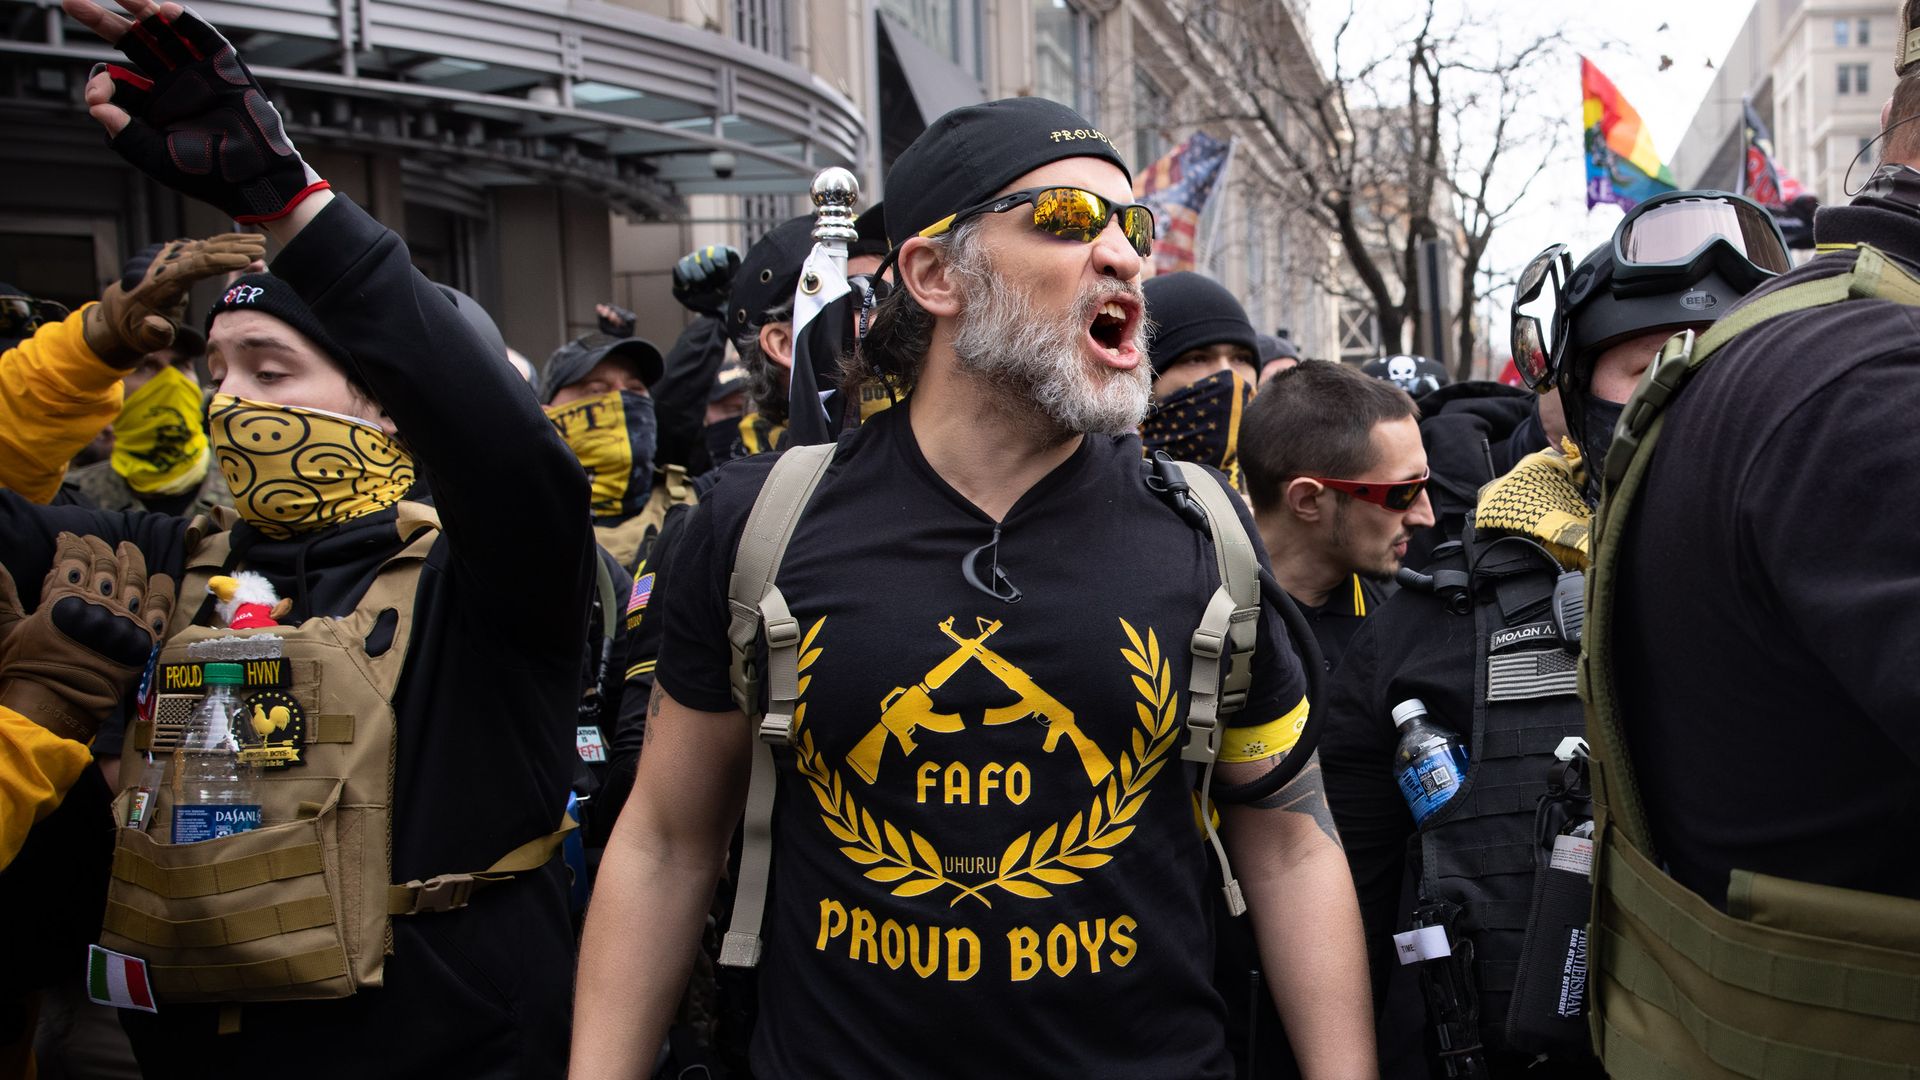 Proud Boys members rallying for Donald Trump in Washington, D.C., in December 2020.